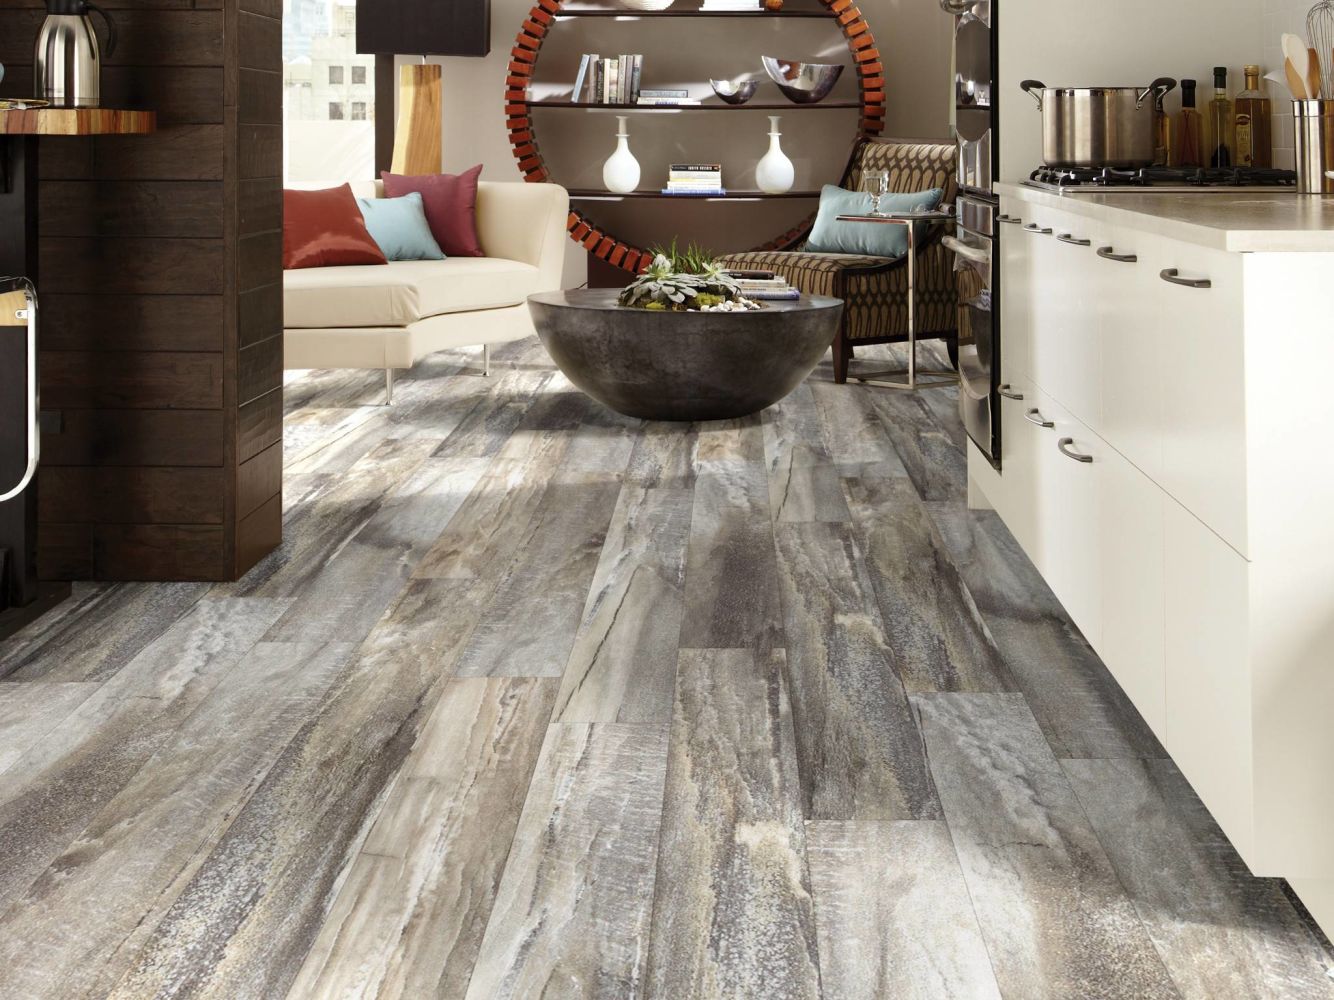 Shaw Floors Resilient Residential Metro Mod Five Spice 00546_CV124